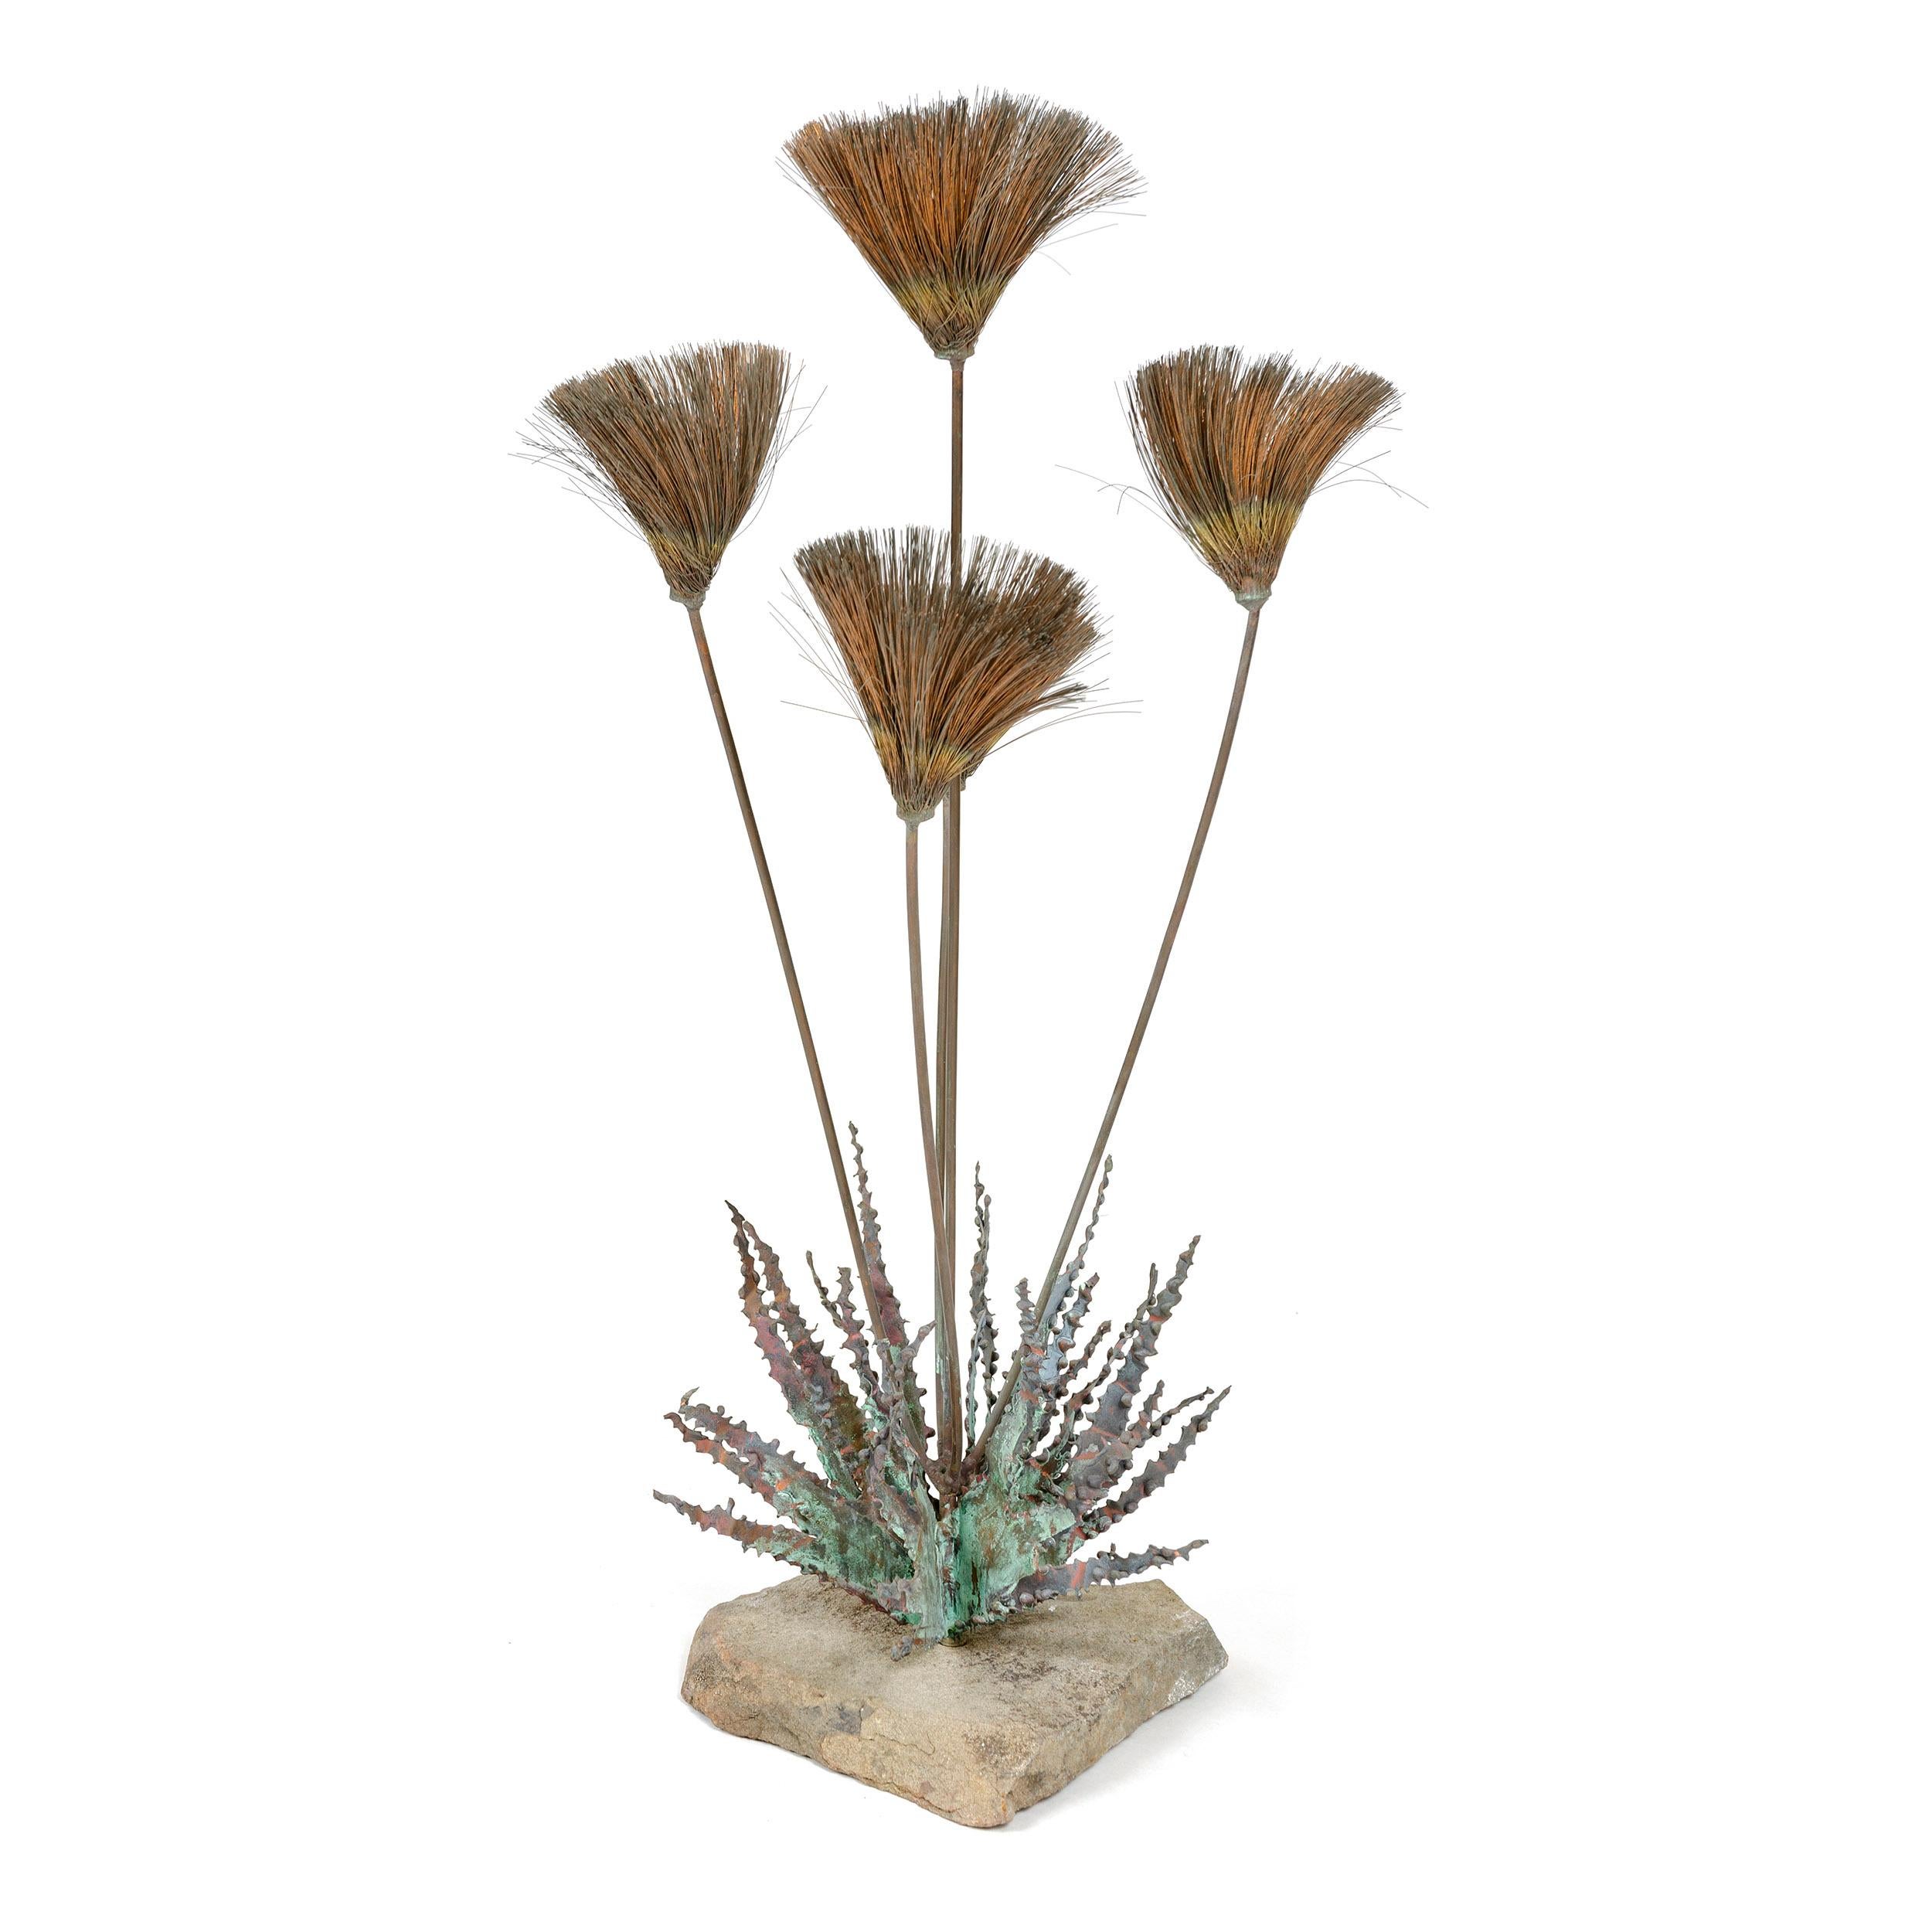 From Steck’s 'Desert Flower’ series, this tabletop sculpture exhibits, per an America House advertisement in Craft Horizons January/February 1965 (which illustrates this sculpture), “sizzle blooms of burnished copper on long-stemmed bronze and a